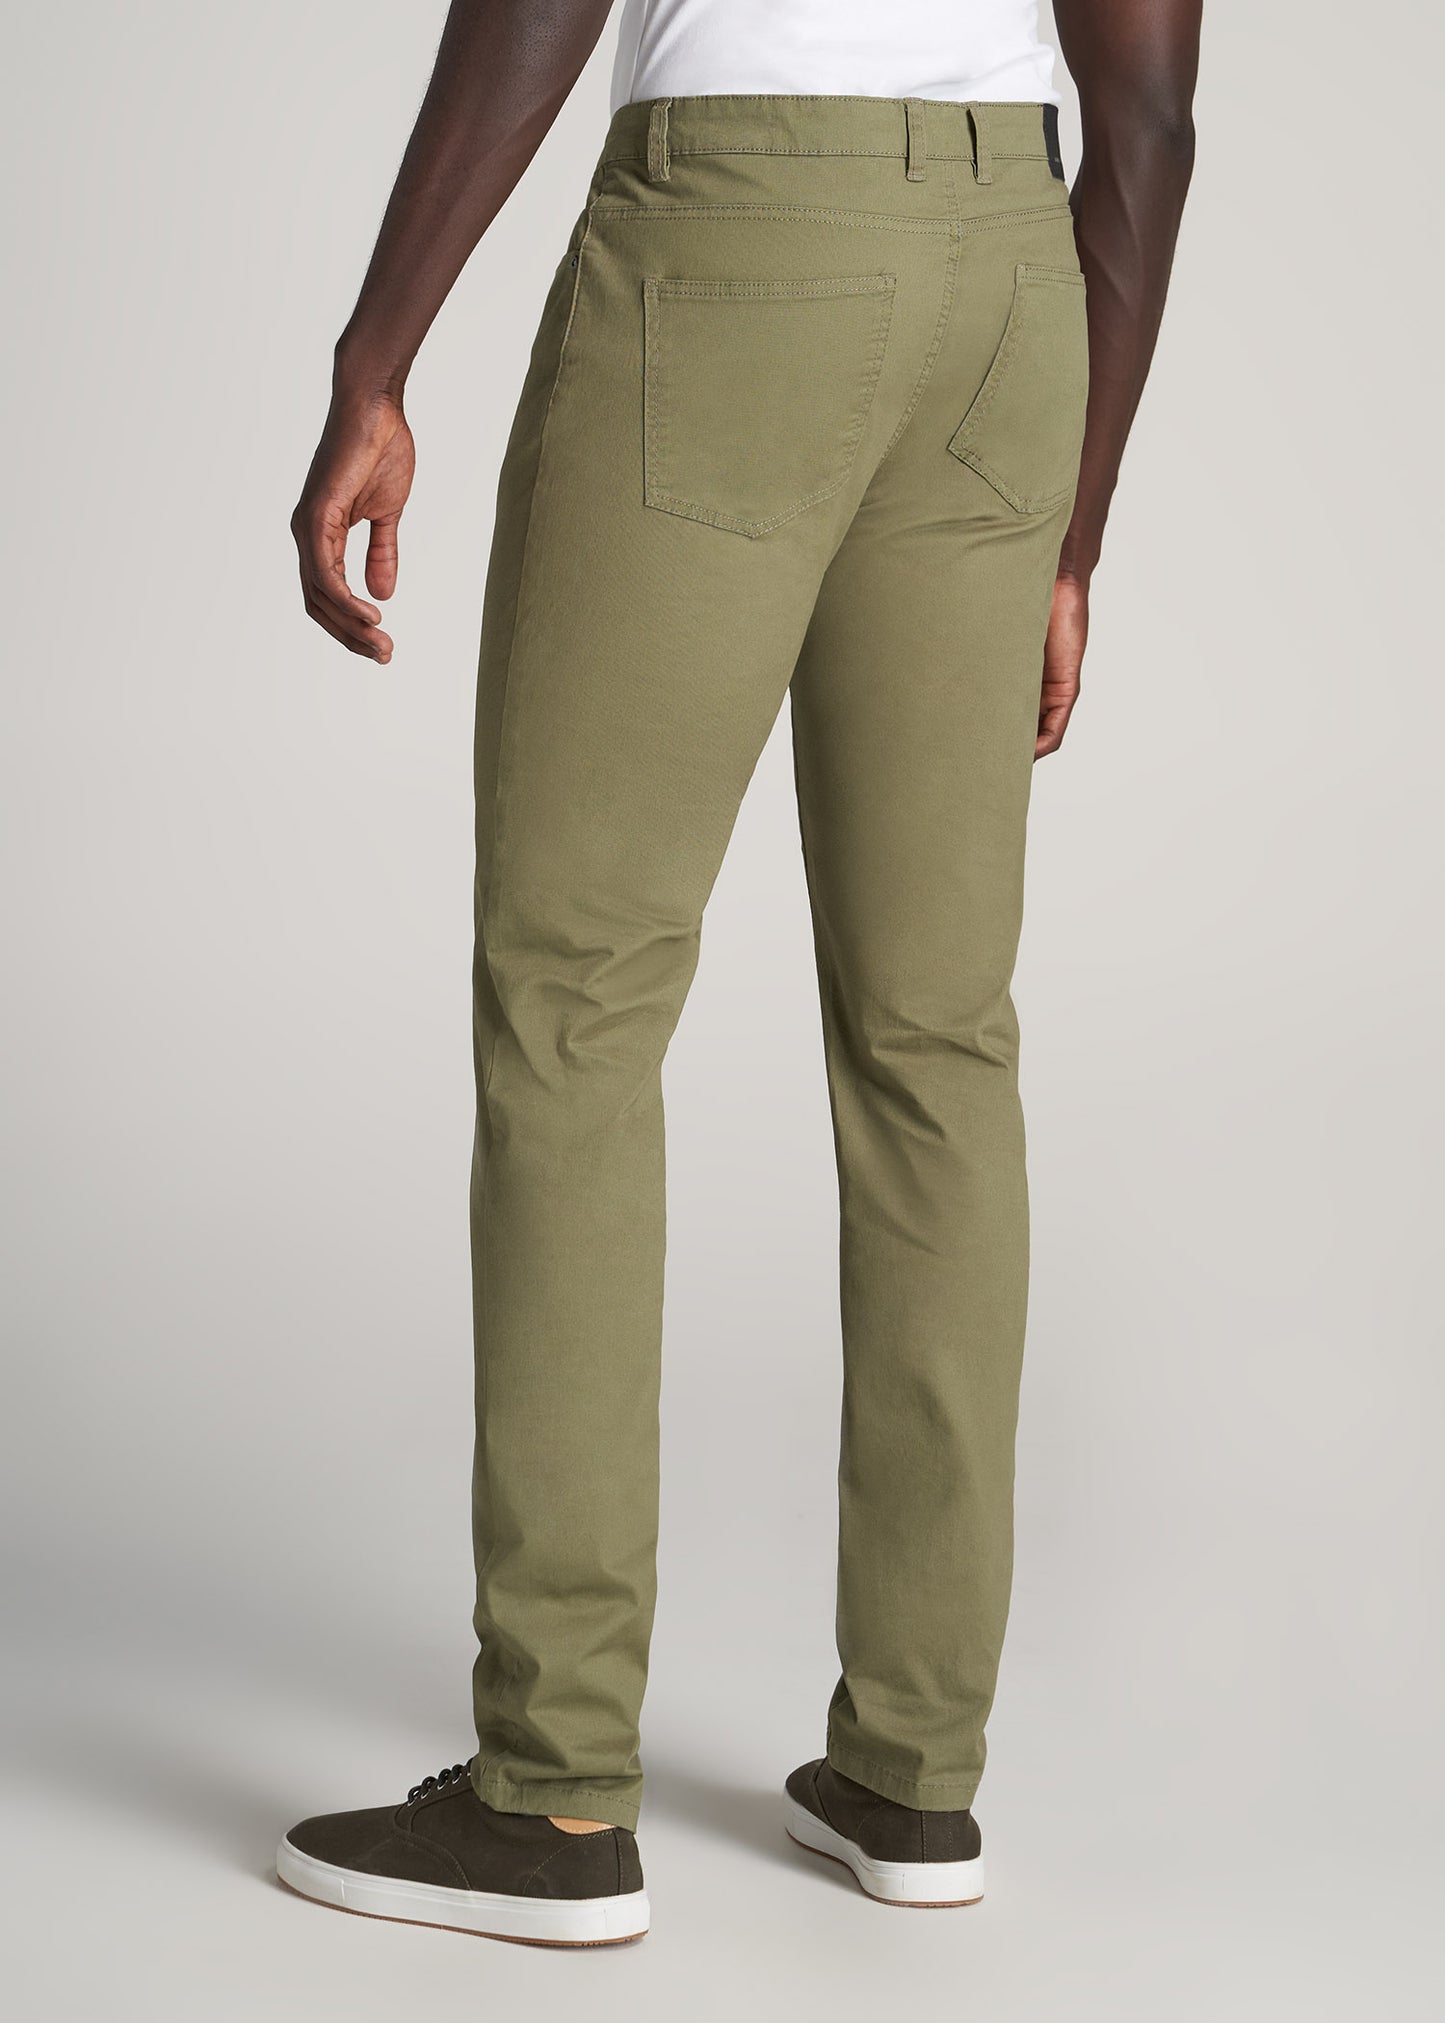 NEW 'Speedy' SLIM Tall Men's Athletic Pants - 5 Colors to Choose From!